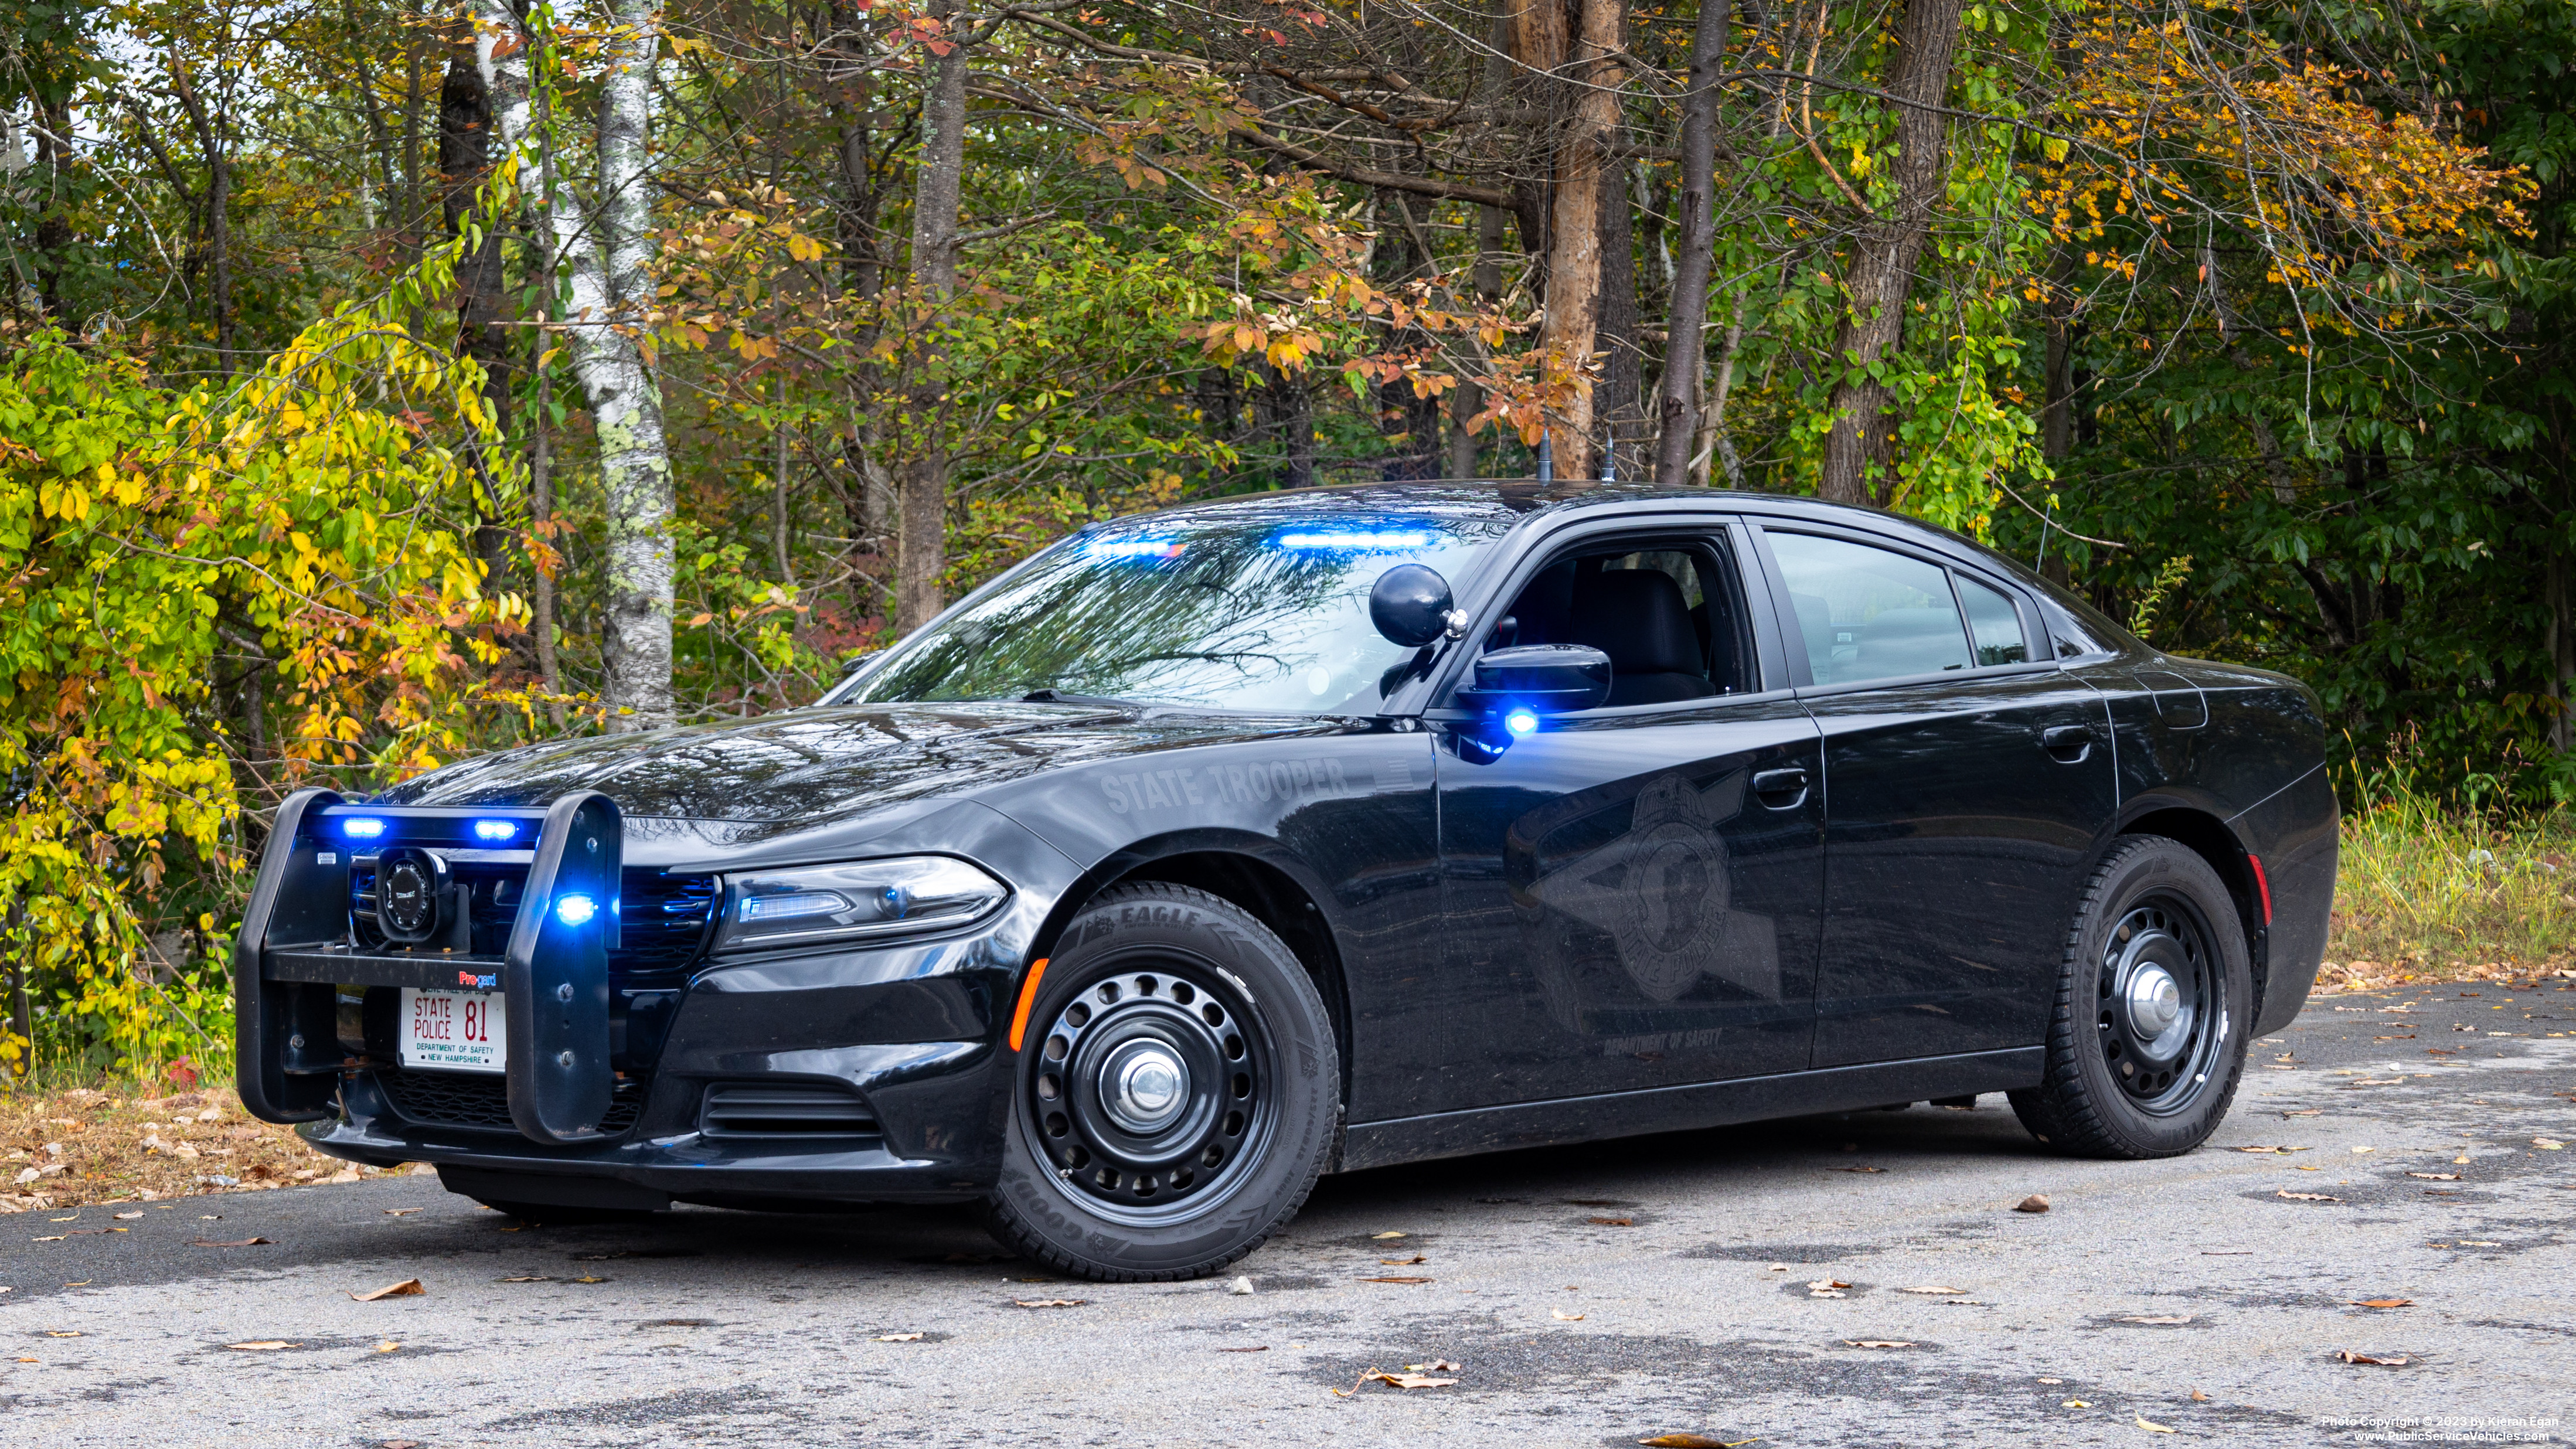 A photo  of New Hampshire State Police
            Cruiser 81, a 2020 Dodge Charger             taken by Kieran Egan